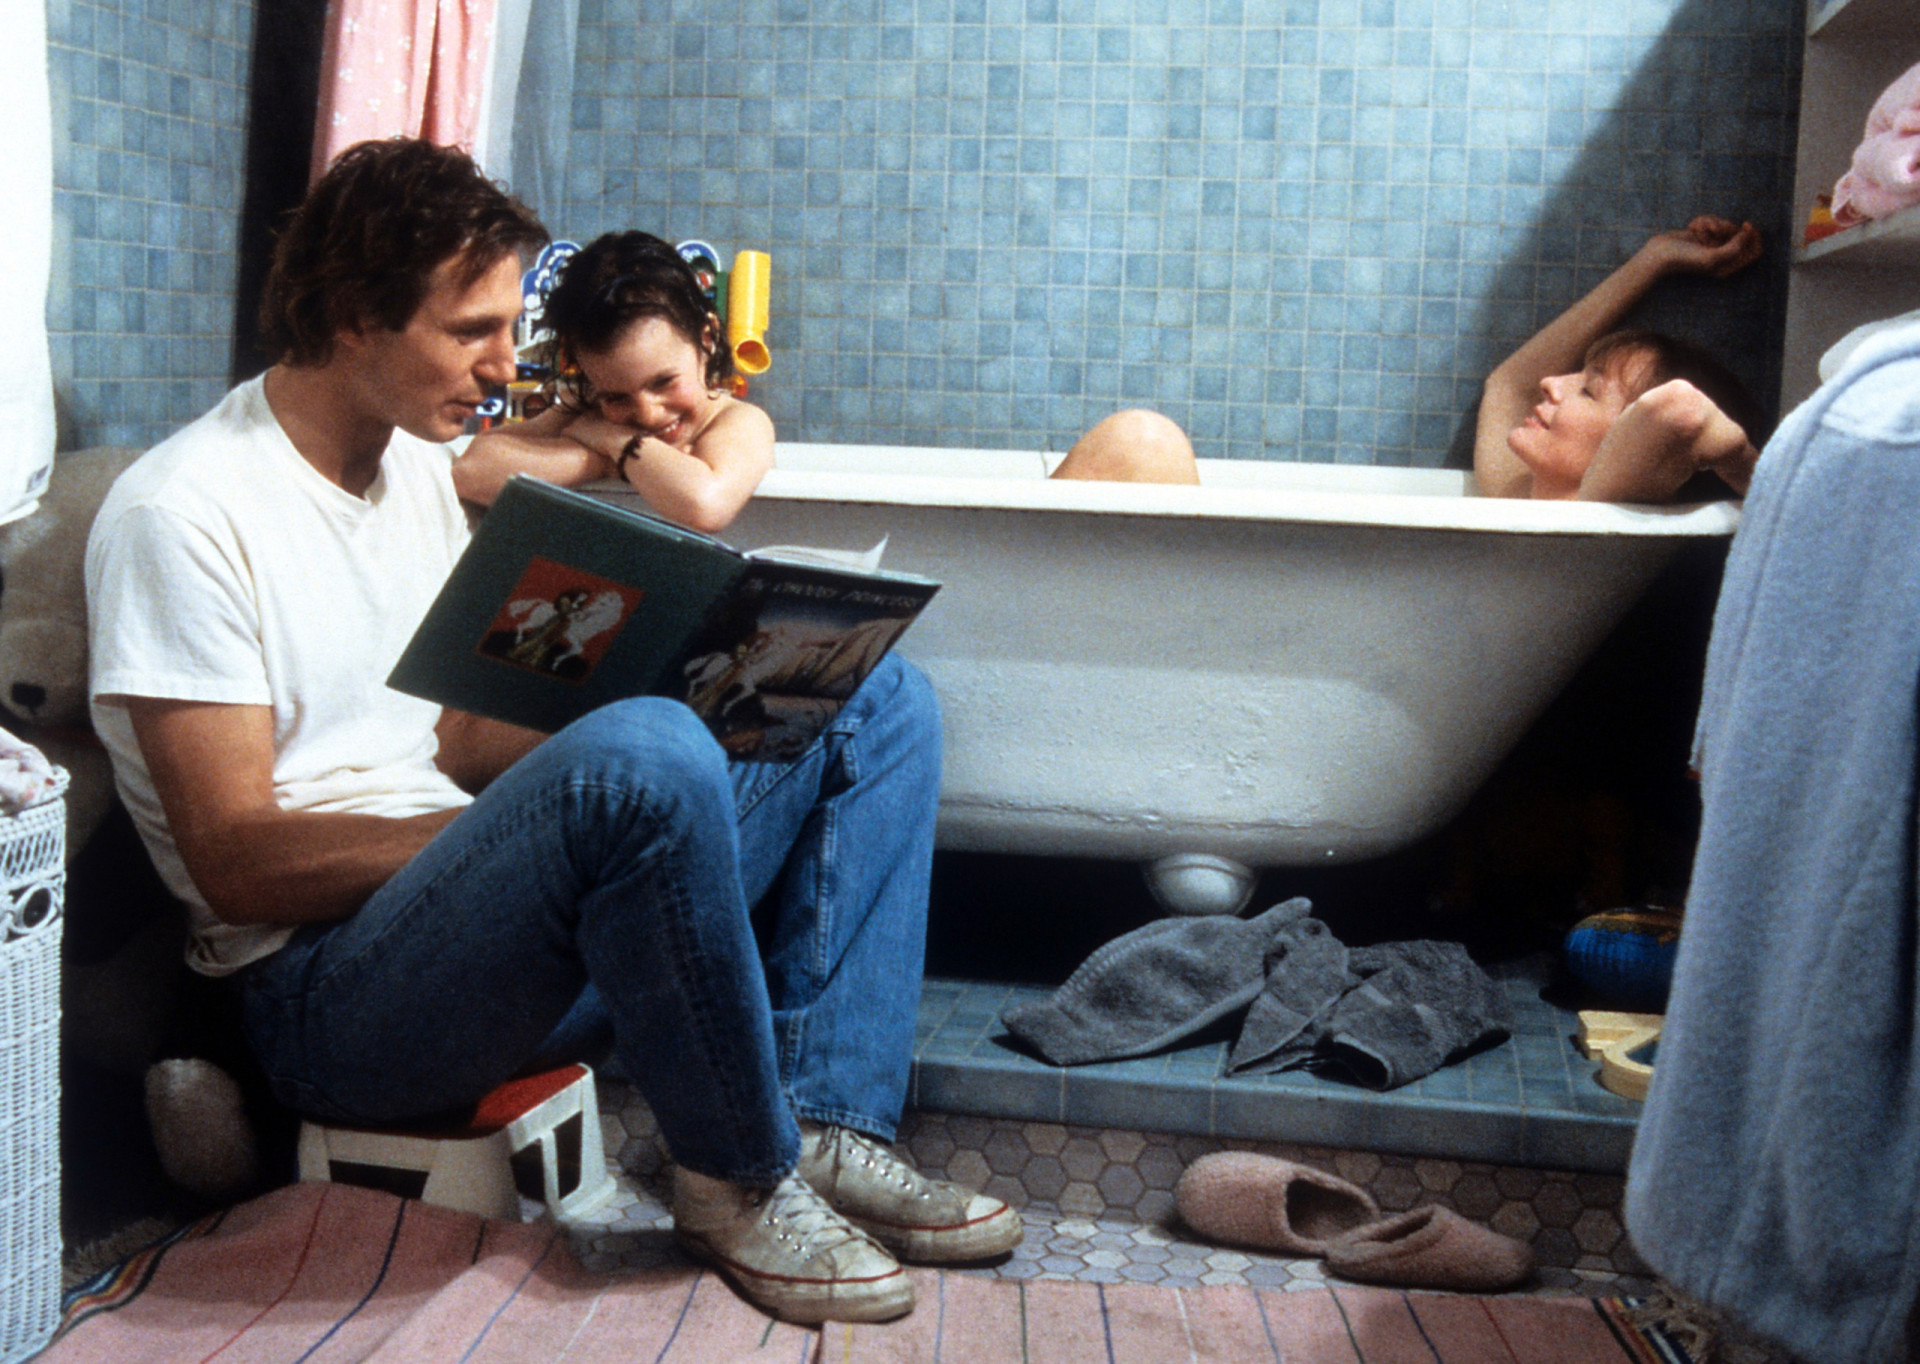 <p>Leonard Nimoy—Spock of 'Star Trek' fame—directed this drama, which stars Diane Keaton and Liam Neeson, seen here with Asia Vieira in the movie's bathtub reading scene.</p><p><a href="https://www.msn.com/en-us/community/channel/vid-7xx8mnucu55yw63we9va2gwr7uihbxwc68fxqp25x6tg4ftibpra?cvid=94631541bc0f4f89bfd59158d696ad7e">Follow us and access great exclusive content every day</a></p>